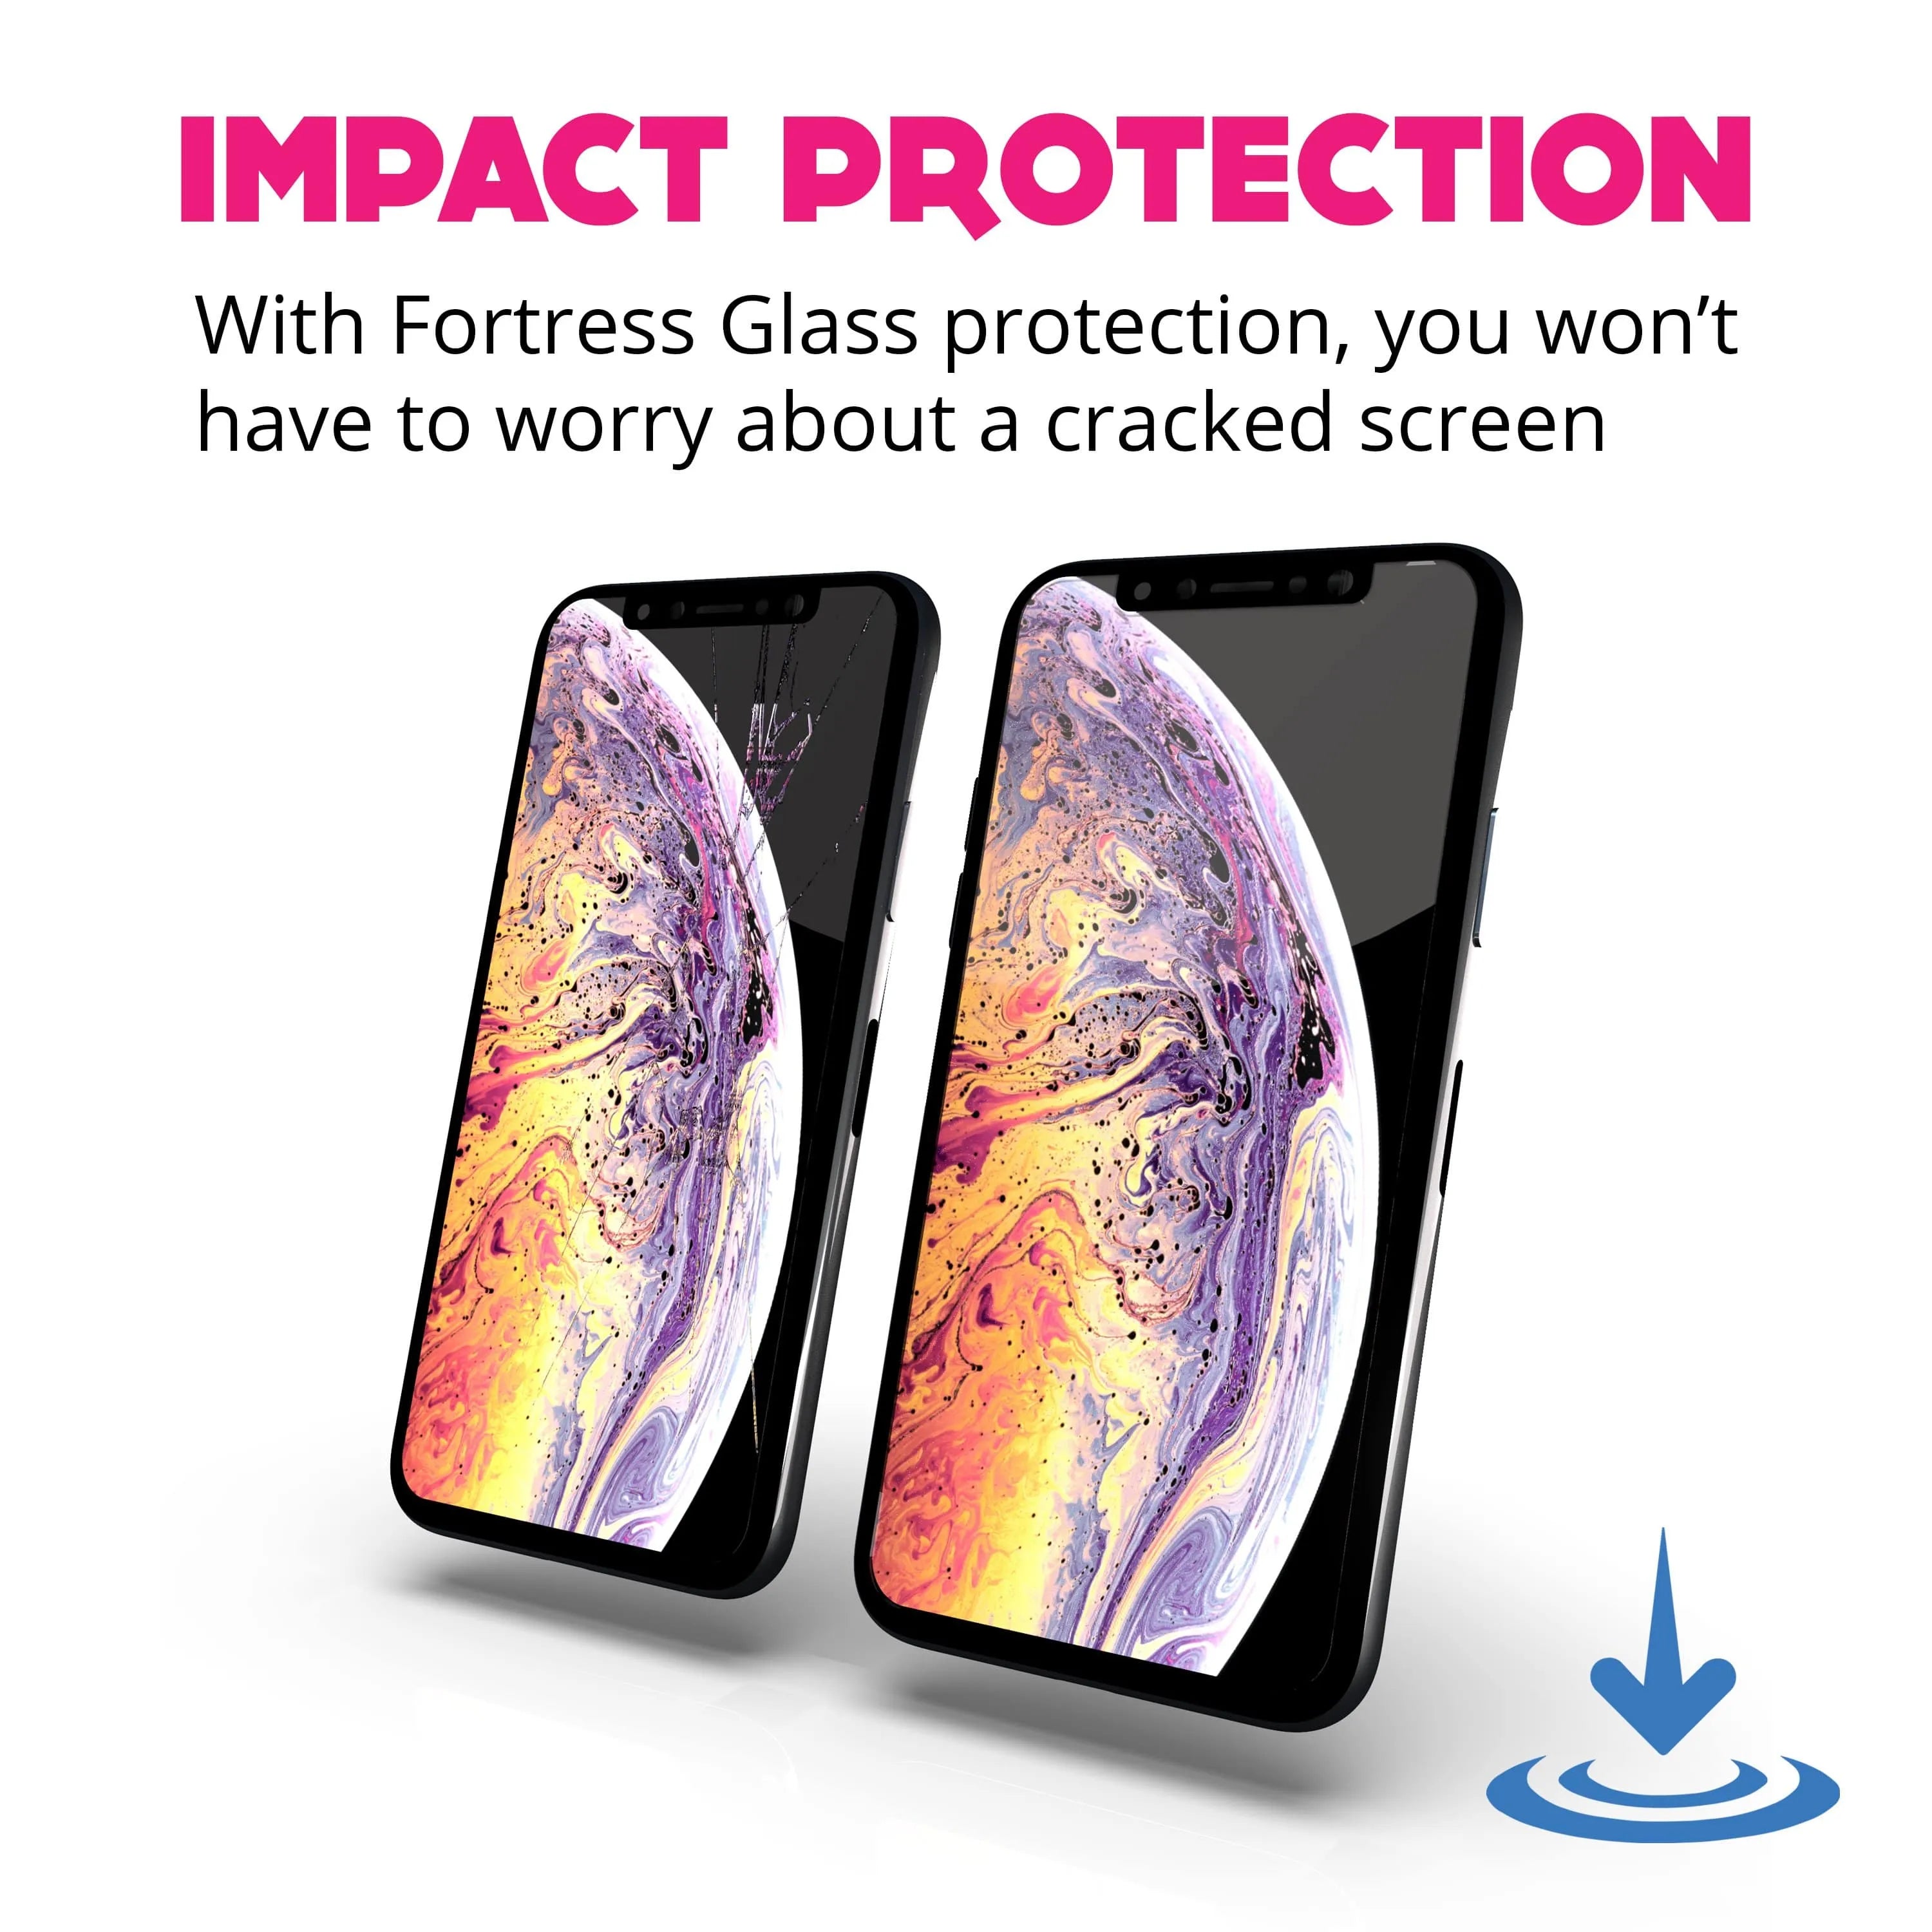 Fortress iPhone 13 Mini Screen Protector - $200 Device Coverage  Scooch Screen Protector